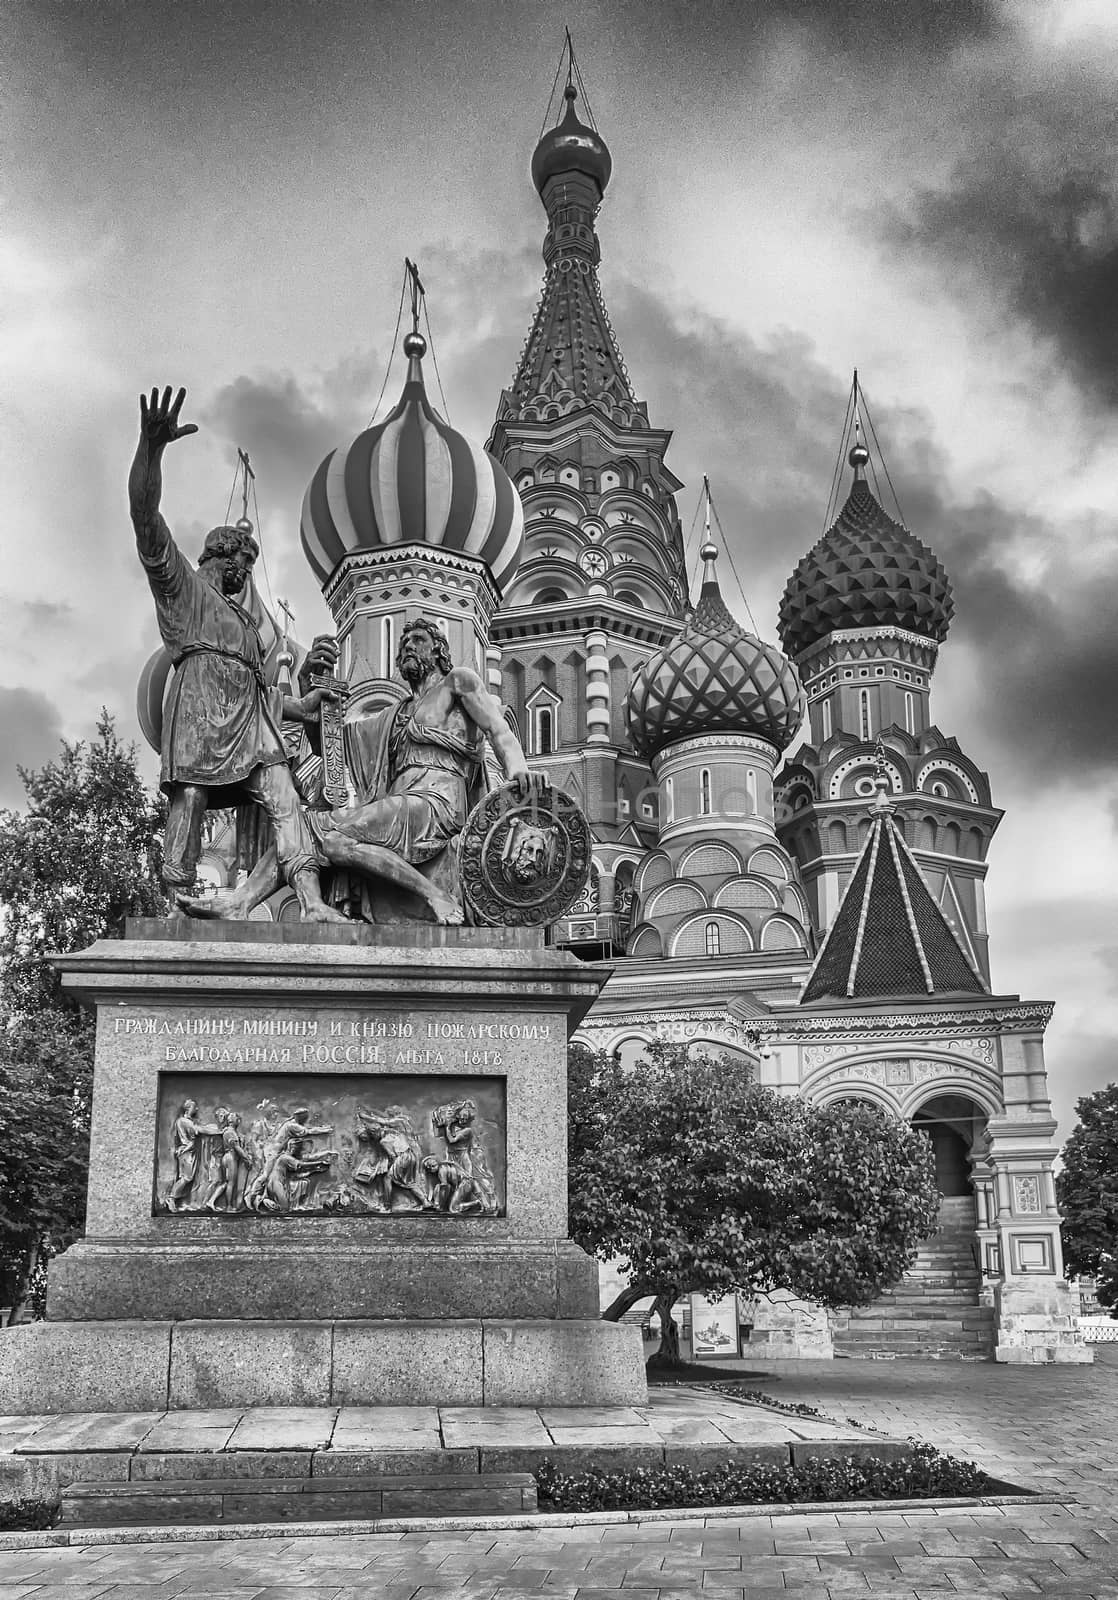 Saint Basil's Cathedral on Red Square in Moscow, Russia by marcorubino